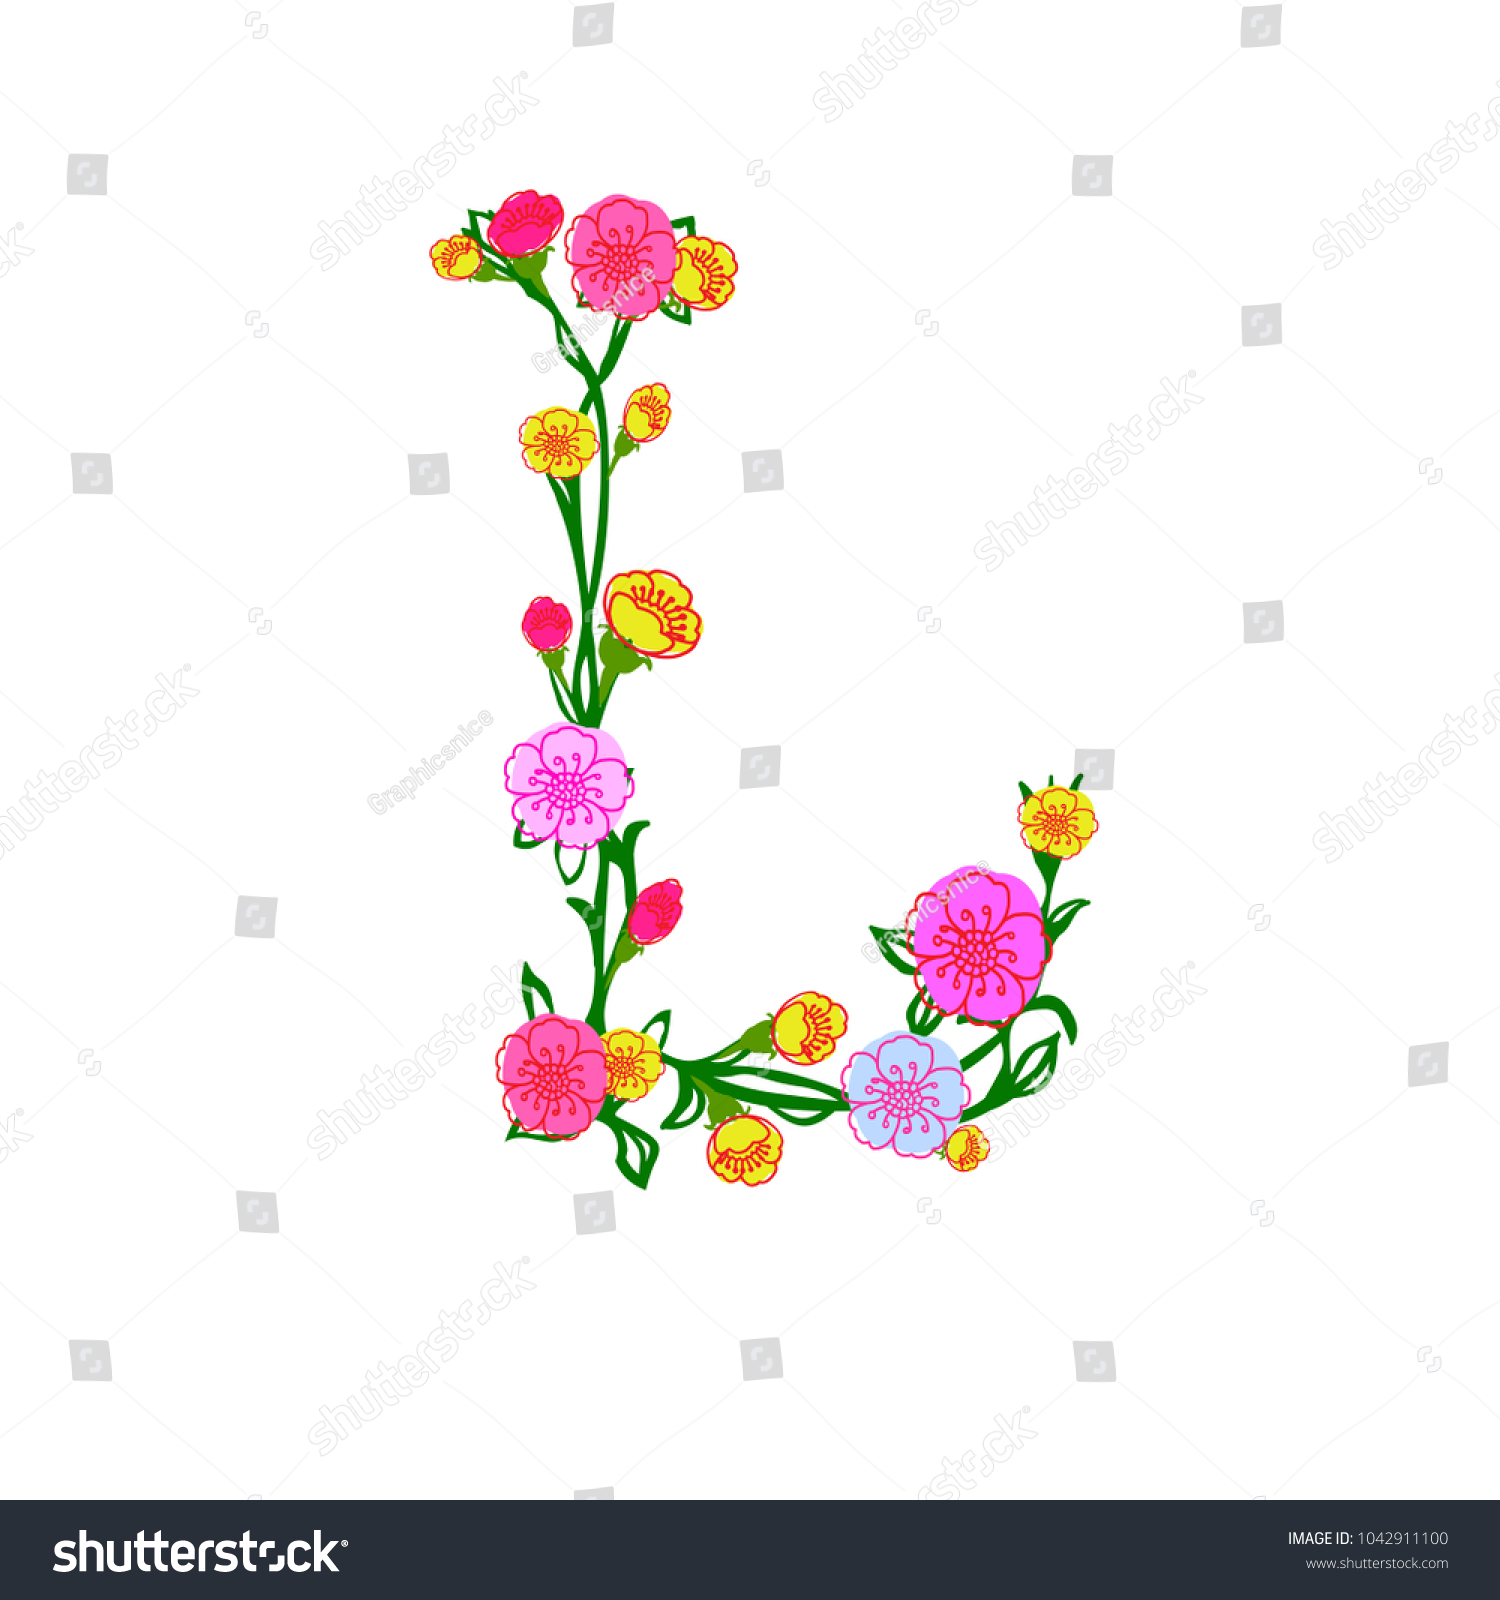 Royalty Free Stock Illustration Of Cute Colorful Floral Alphabet